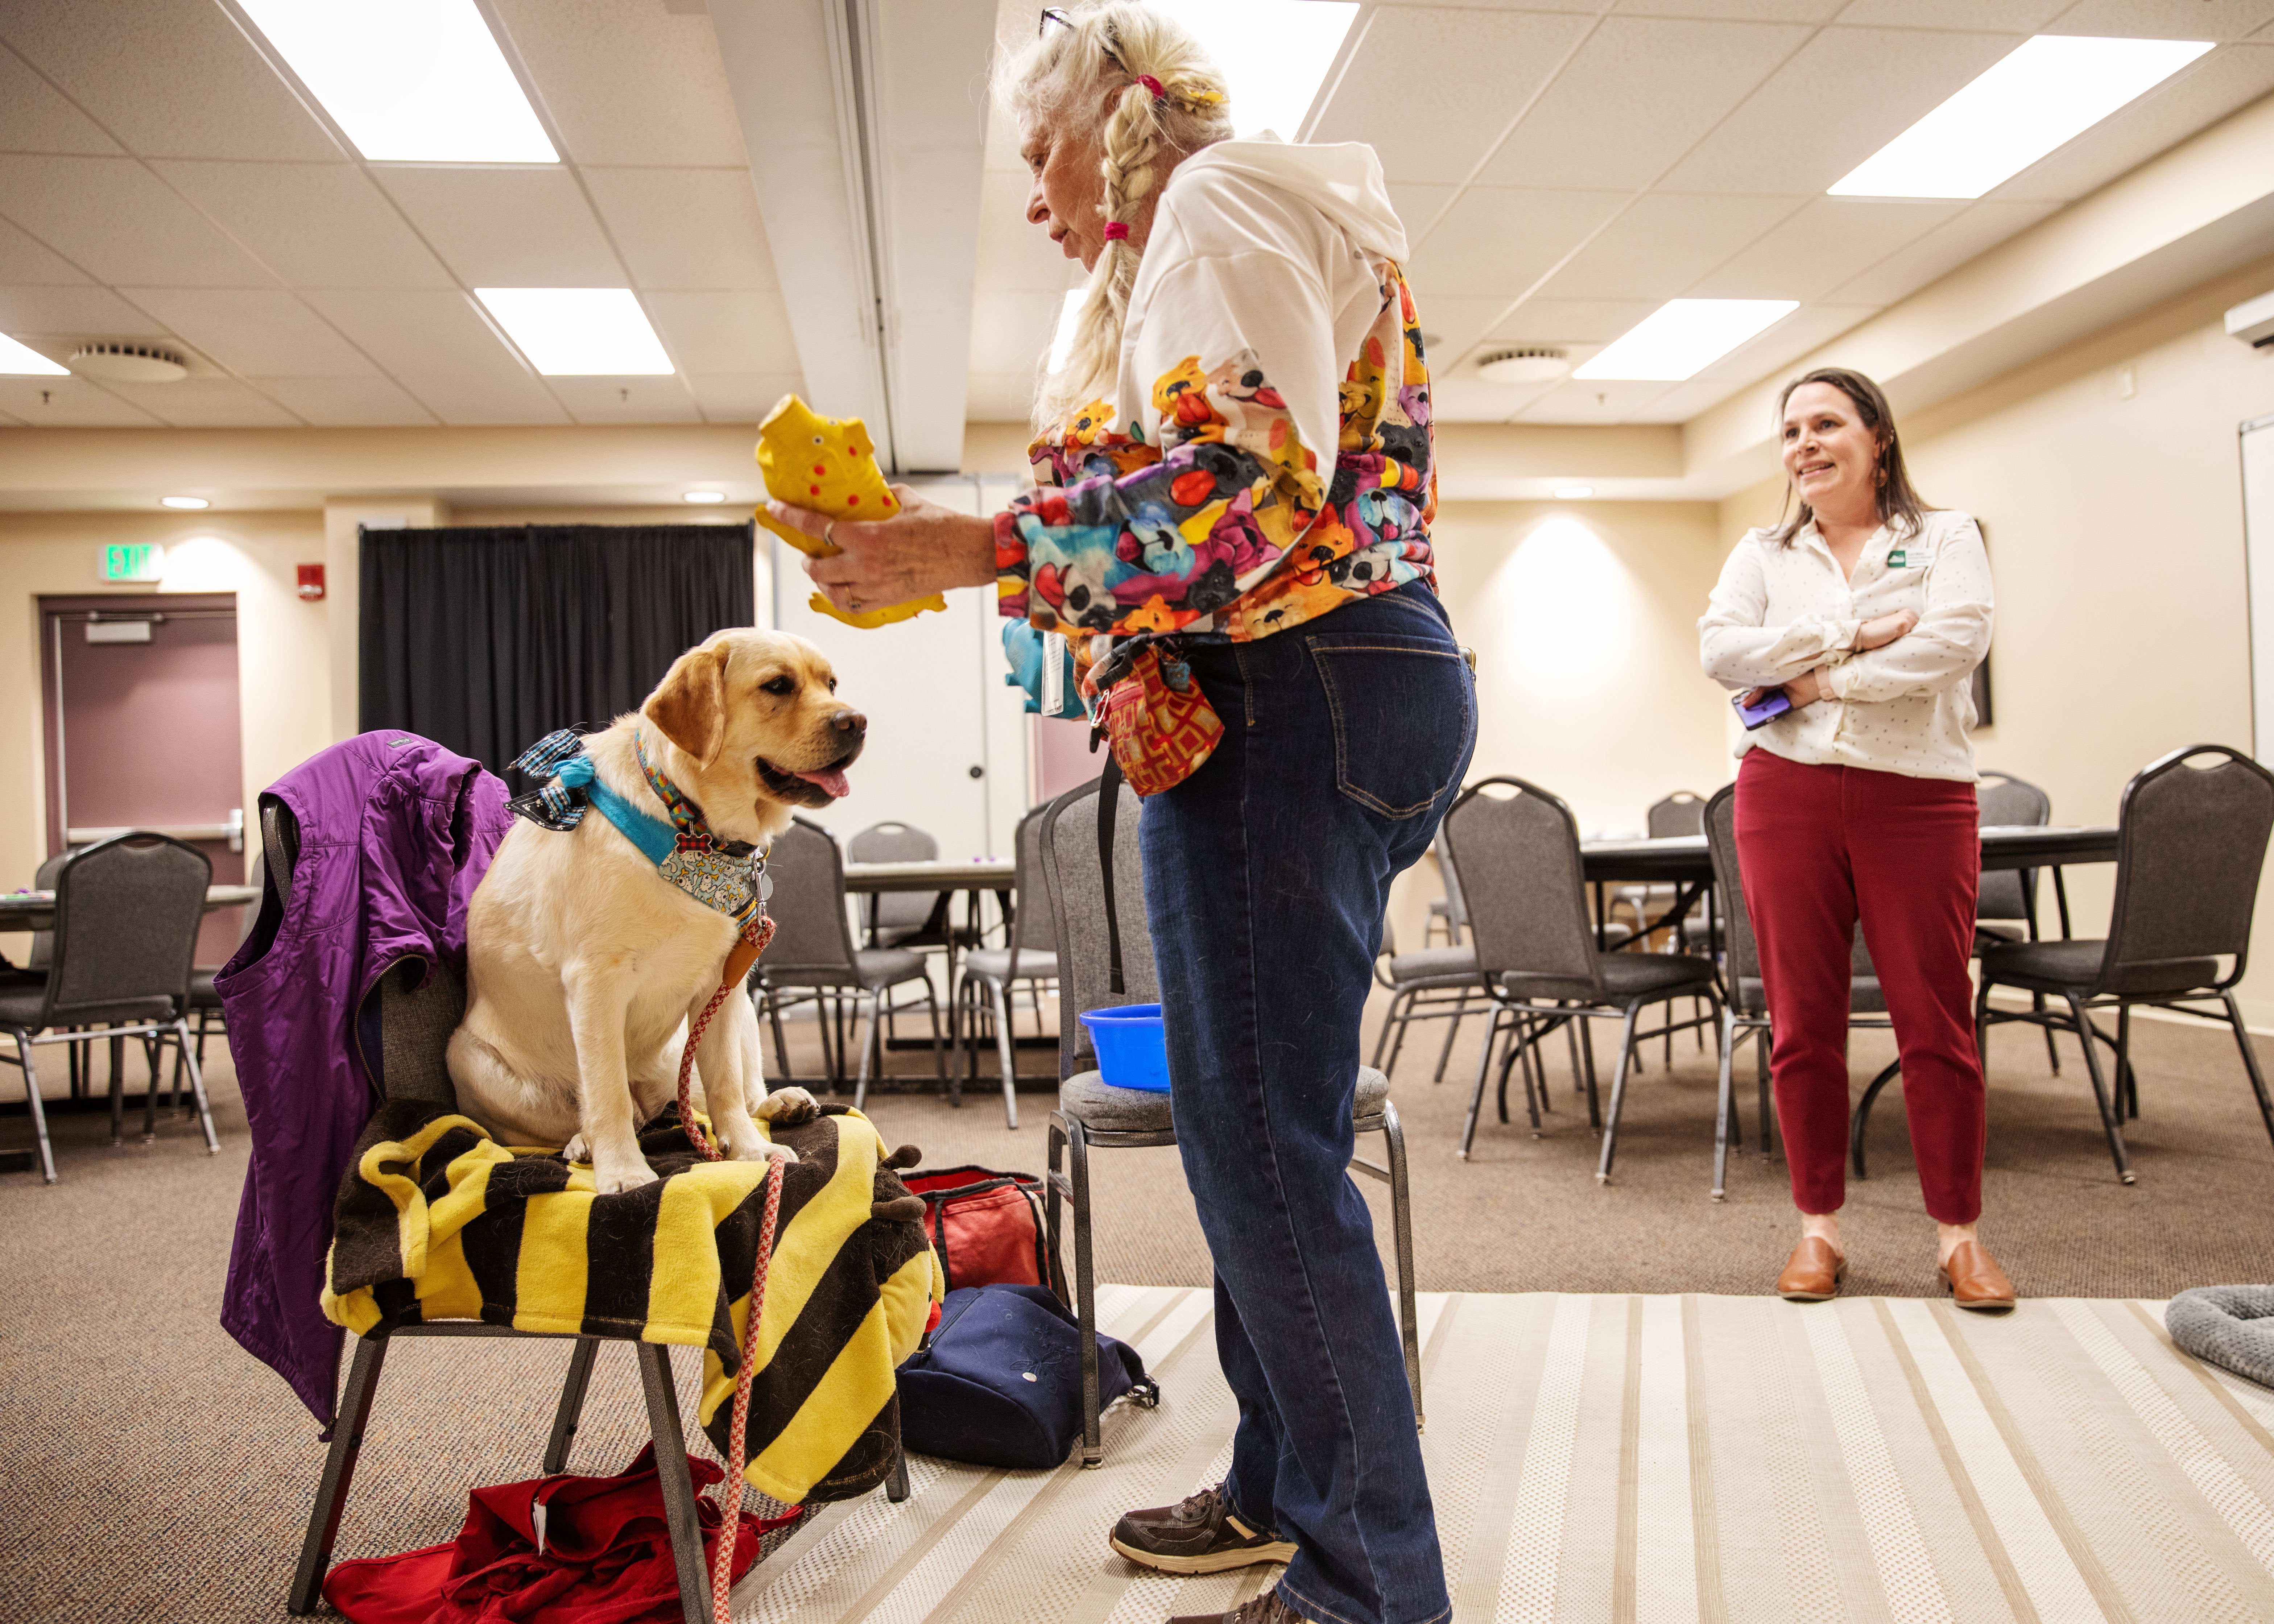 Image 7: Aging and Adult Services Division Manager, Lori Metz, watches a therapy dog do tricks.